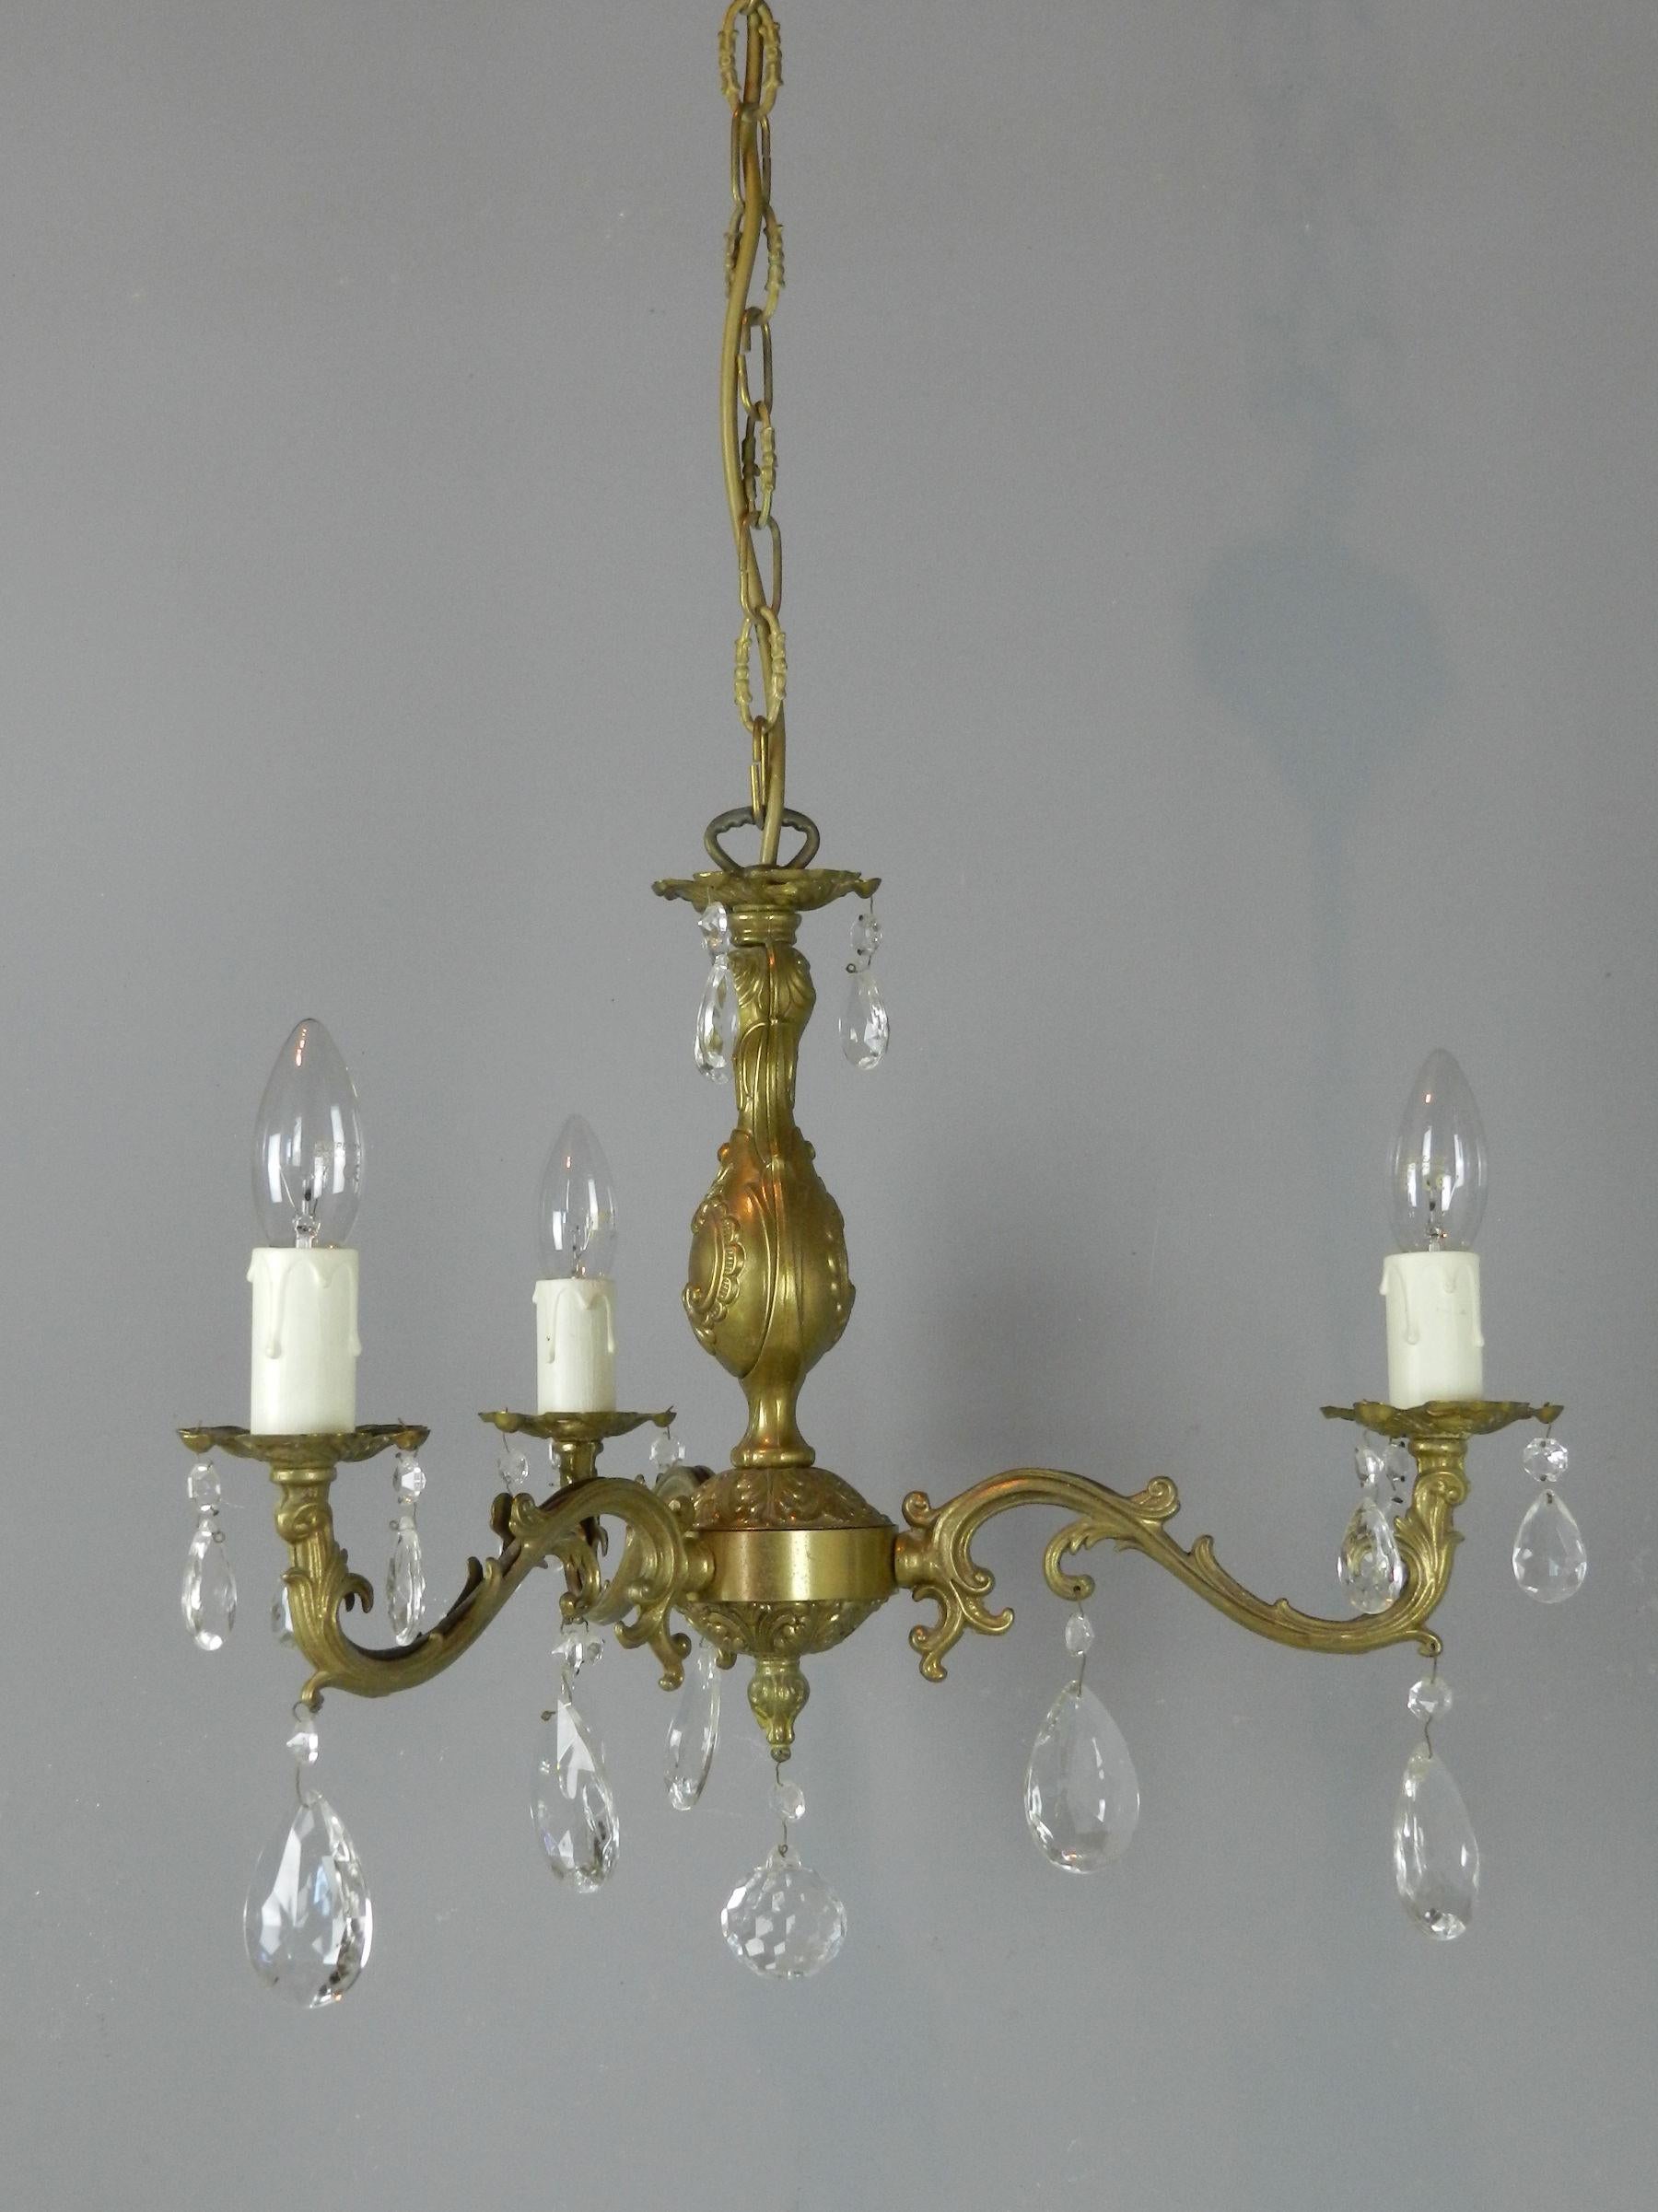 A Pretty French chandelier & matching wall sconces cast in decorative gilt metal. The chandelier has 3 s scroll out swept arms holding the candlelight bulbs. 

The whole chandelier is decorated with multifaceted glass pendants. All suspended on